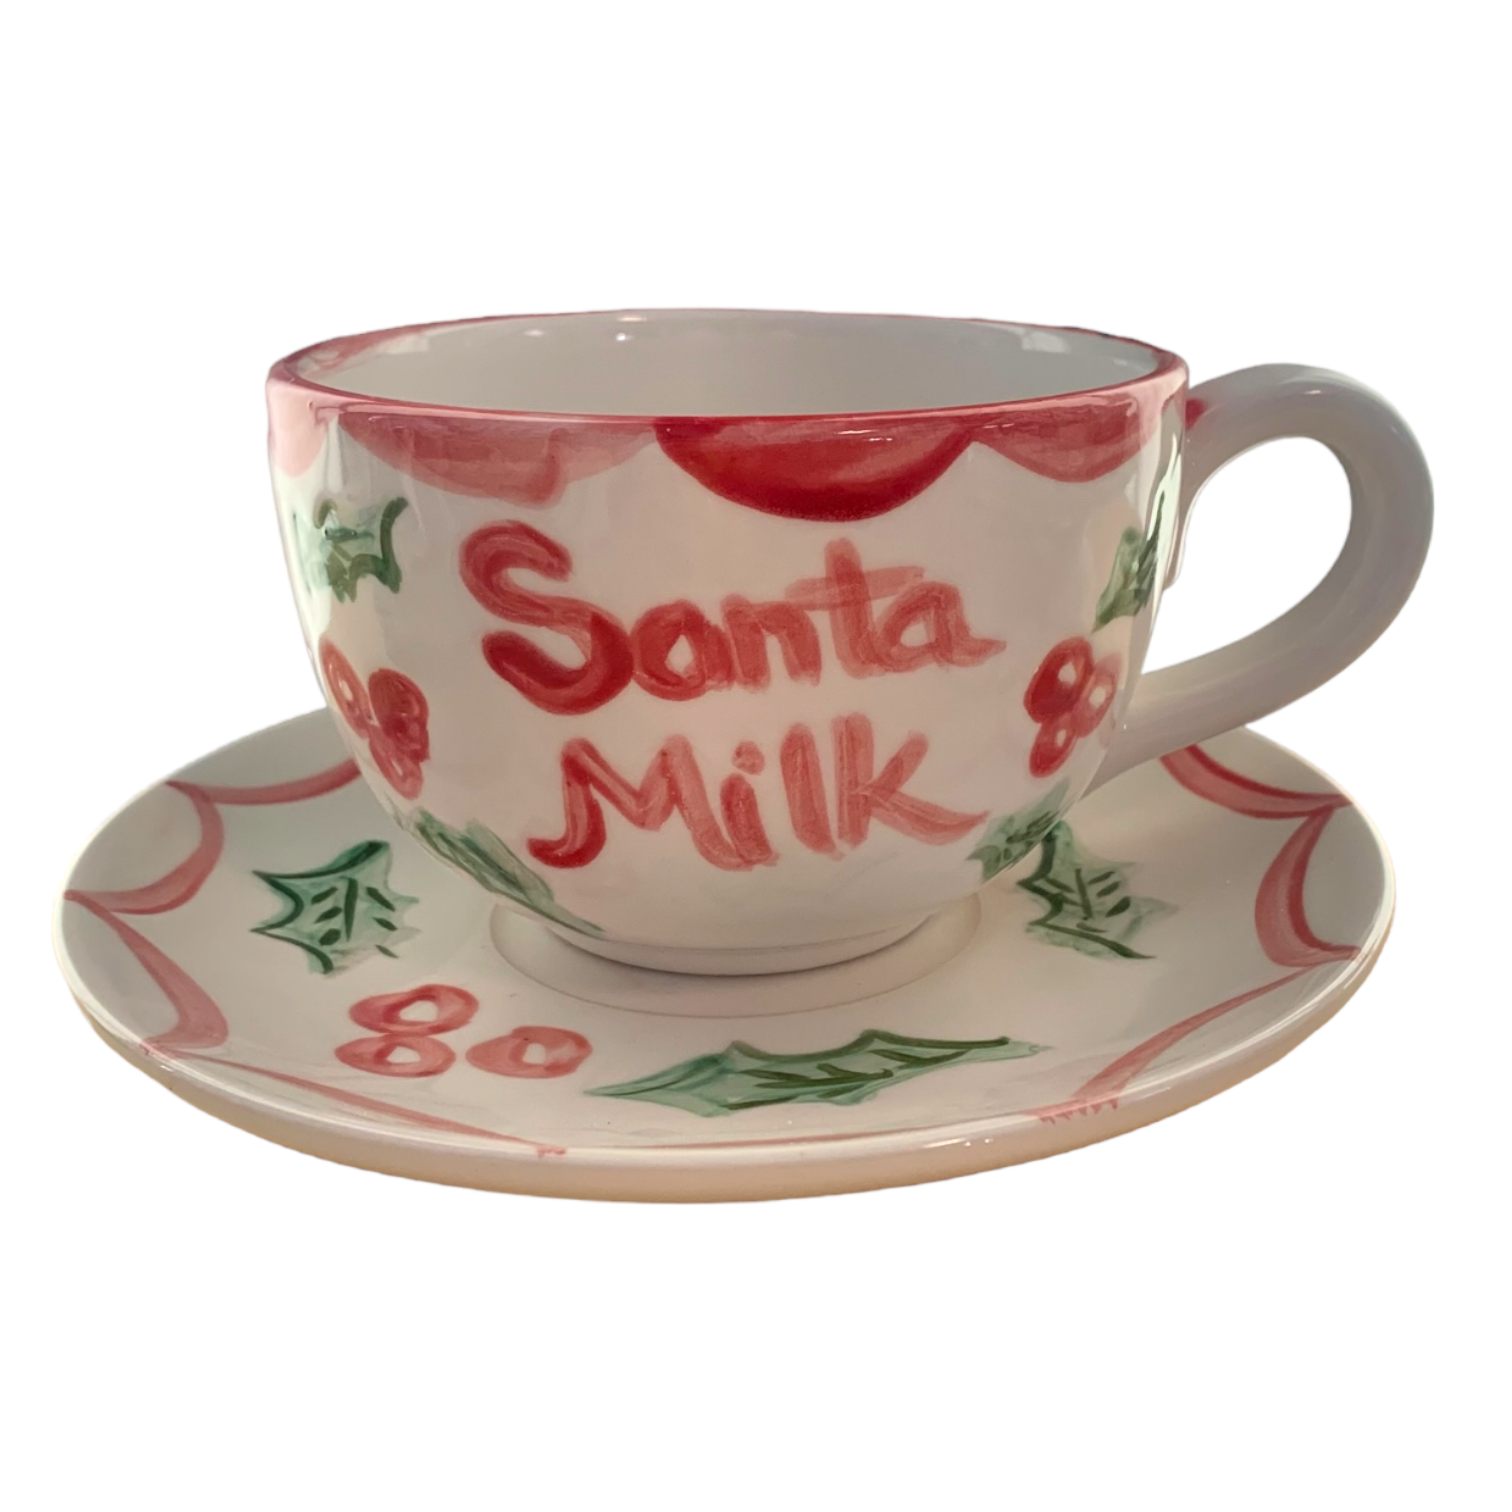 Santa's Milk Tea Cup and Saucer - Premium  from Tricia Lowenfield Design 